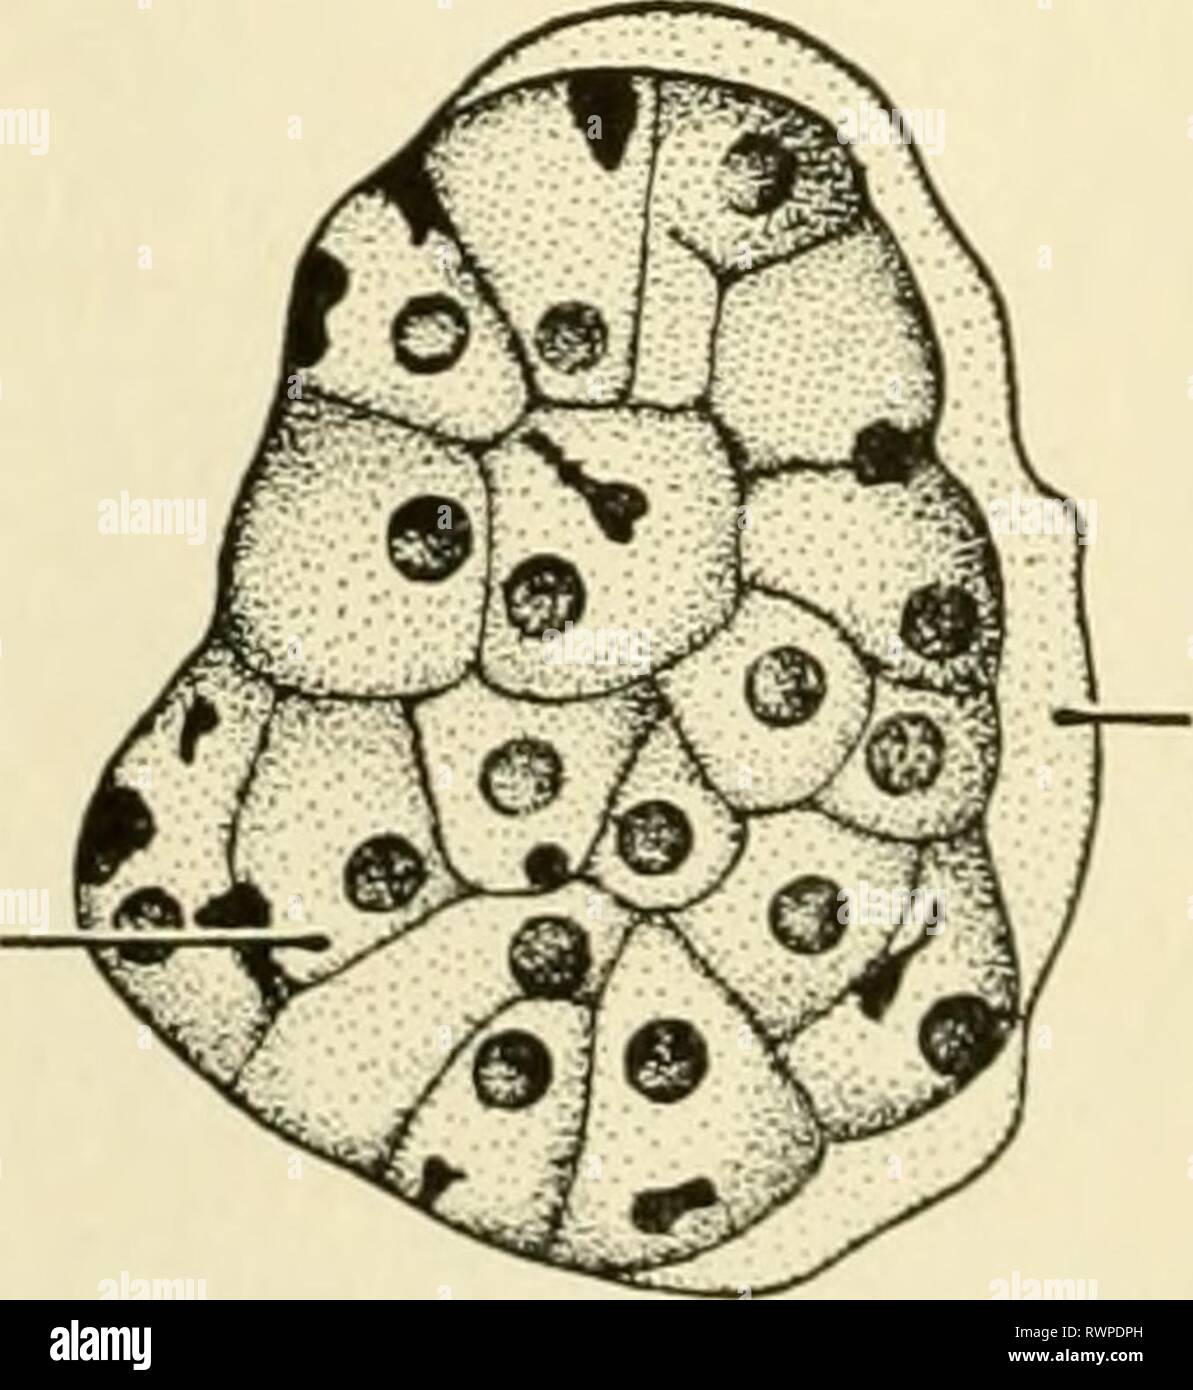 Elements of biology, with special Elements of biology, with special reference to their rôle in the lives of animals elementsofbiolog00buch Year: 1933  RESERVOIR CONTRACTILE VACUOLE FLA6ELLUM MASTICOPHOPA- EUCLENA FIG. 30. INFUSORIA-PARAMOECIUM PLASMODIA    RED BLOOD CORPUSCLE FIG. 3/. SPOROZOA-PLASMODIUM (MALARIA) Figs. 28, 29, 30, and 31.—Examples of the four classes of Protozoa. (Fiji. 29 from various sources; Fig. 31 re-drawn after Calkins: Biology, published by Henry Holt and Co.) Stock Photo